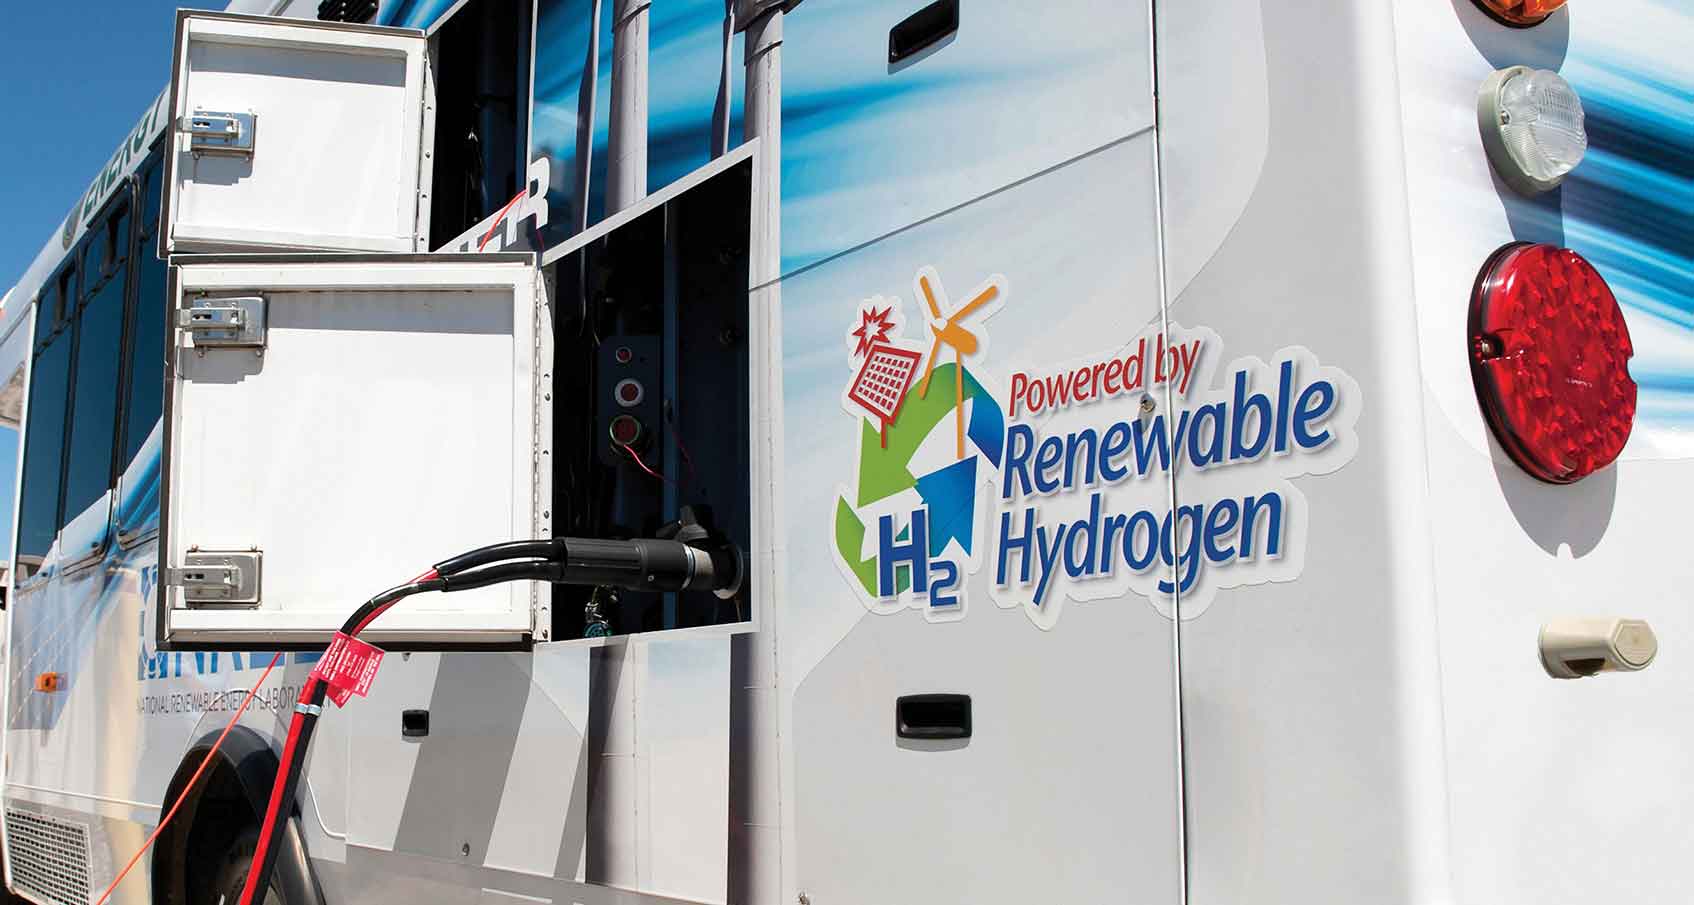 NREL Fuel Cell Bus Analysis Finds Fuel Economy to be 1.4 Times Higher than Diesel